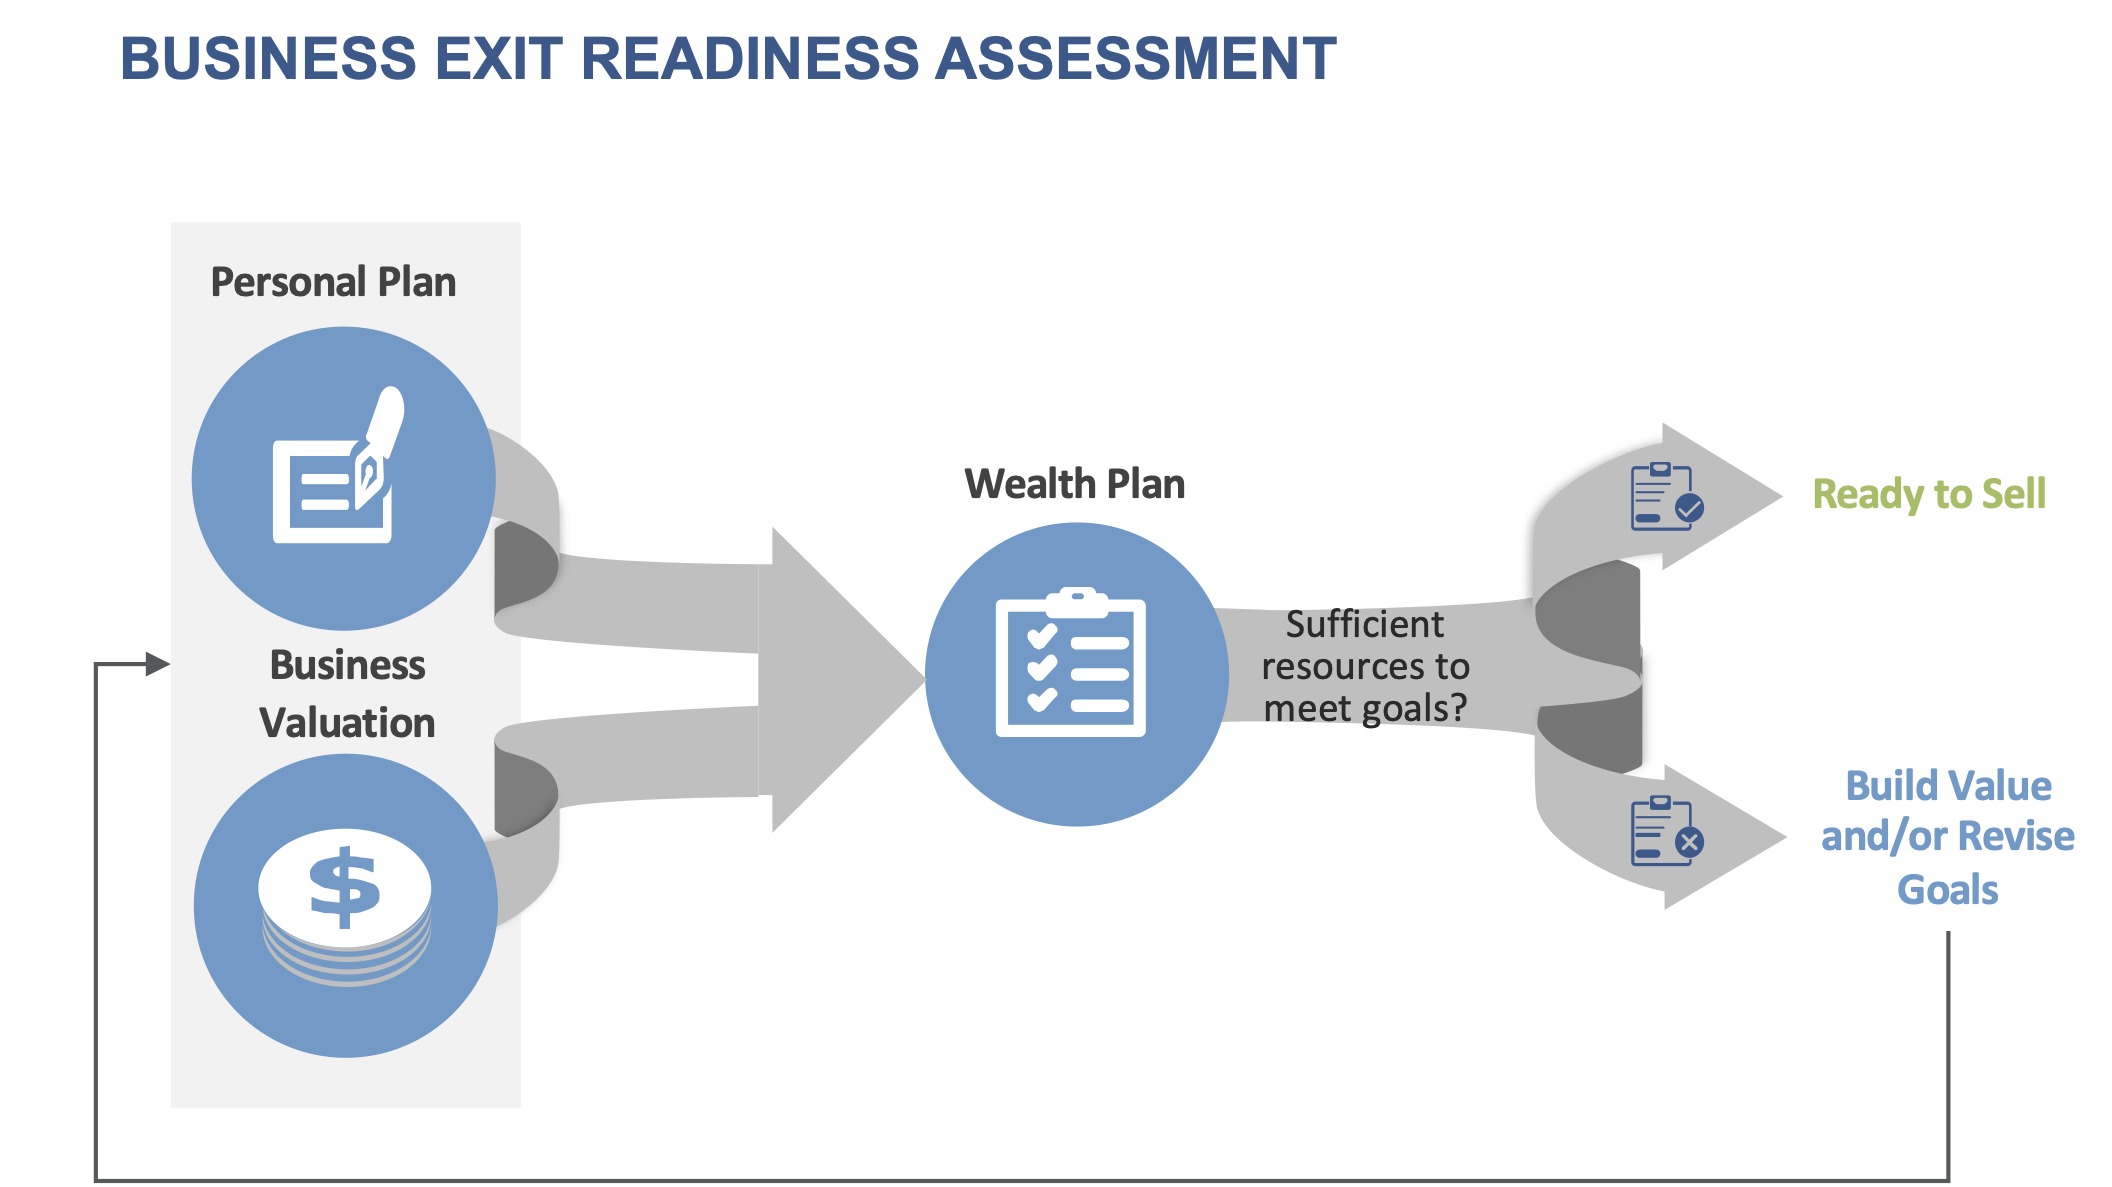 Exhibit B — Business Exit Readiness Assessment